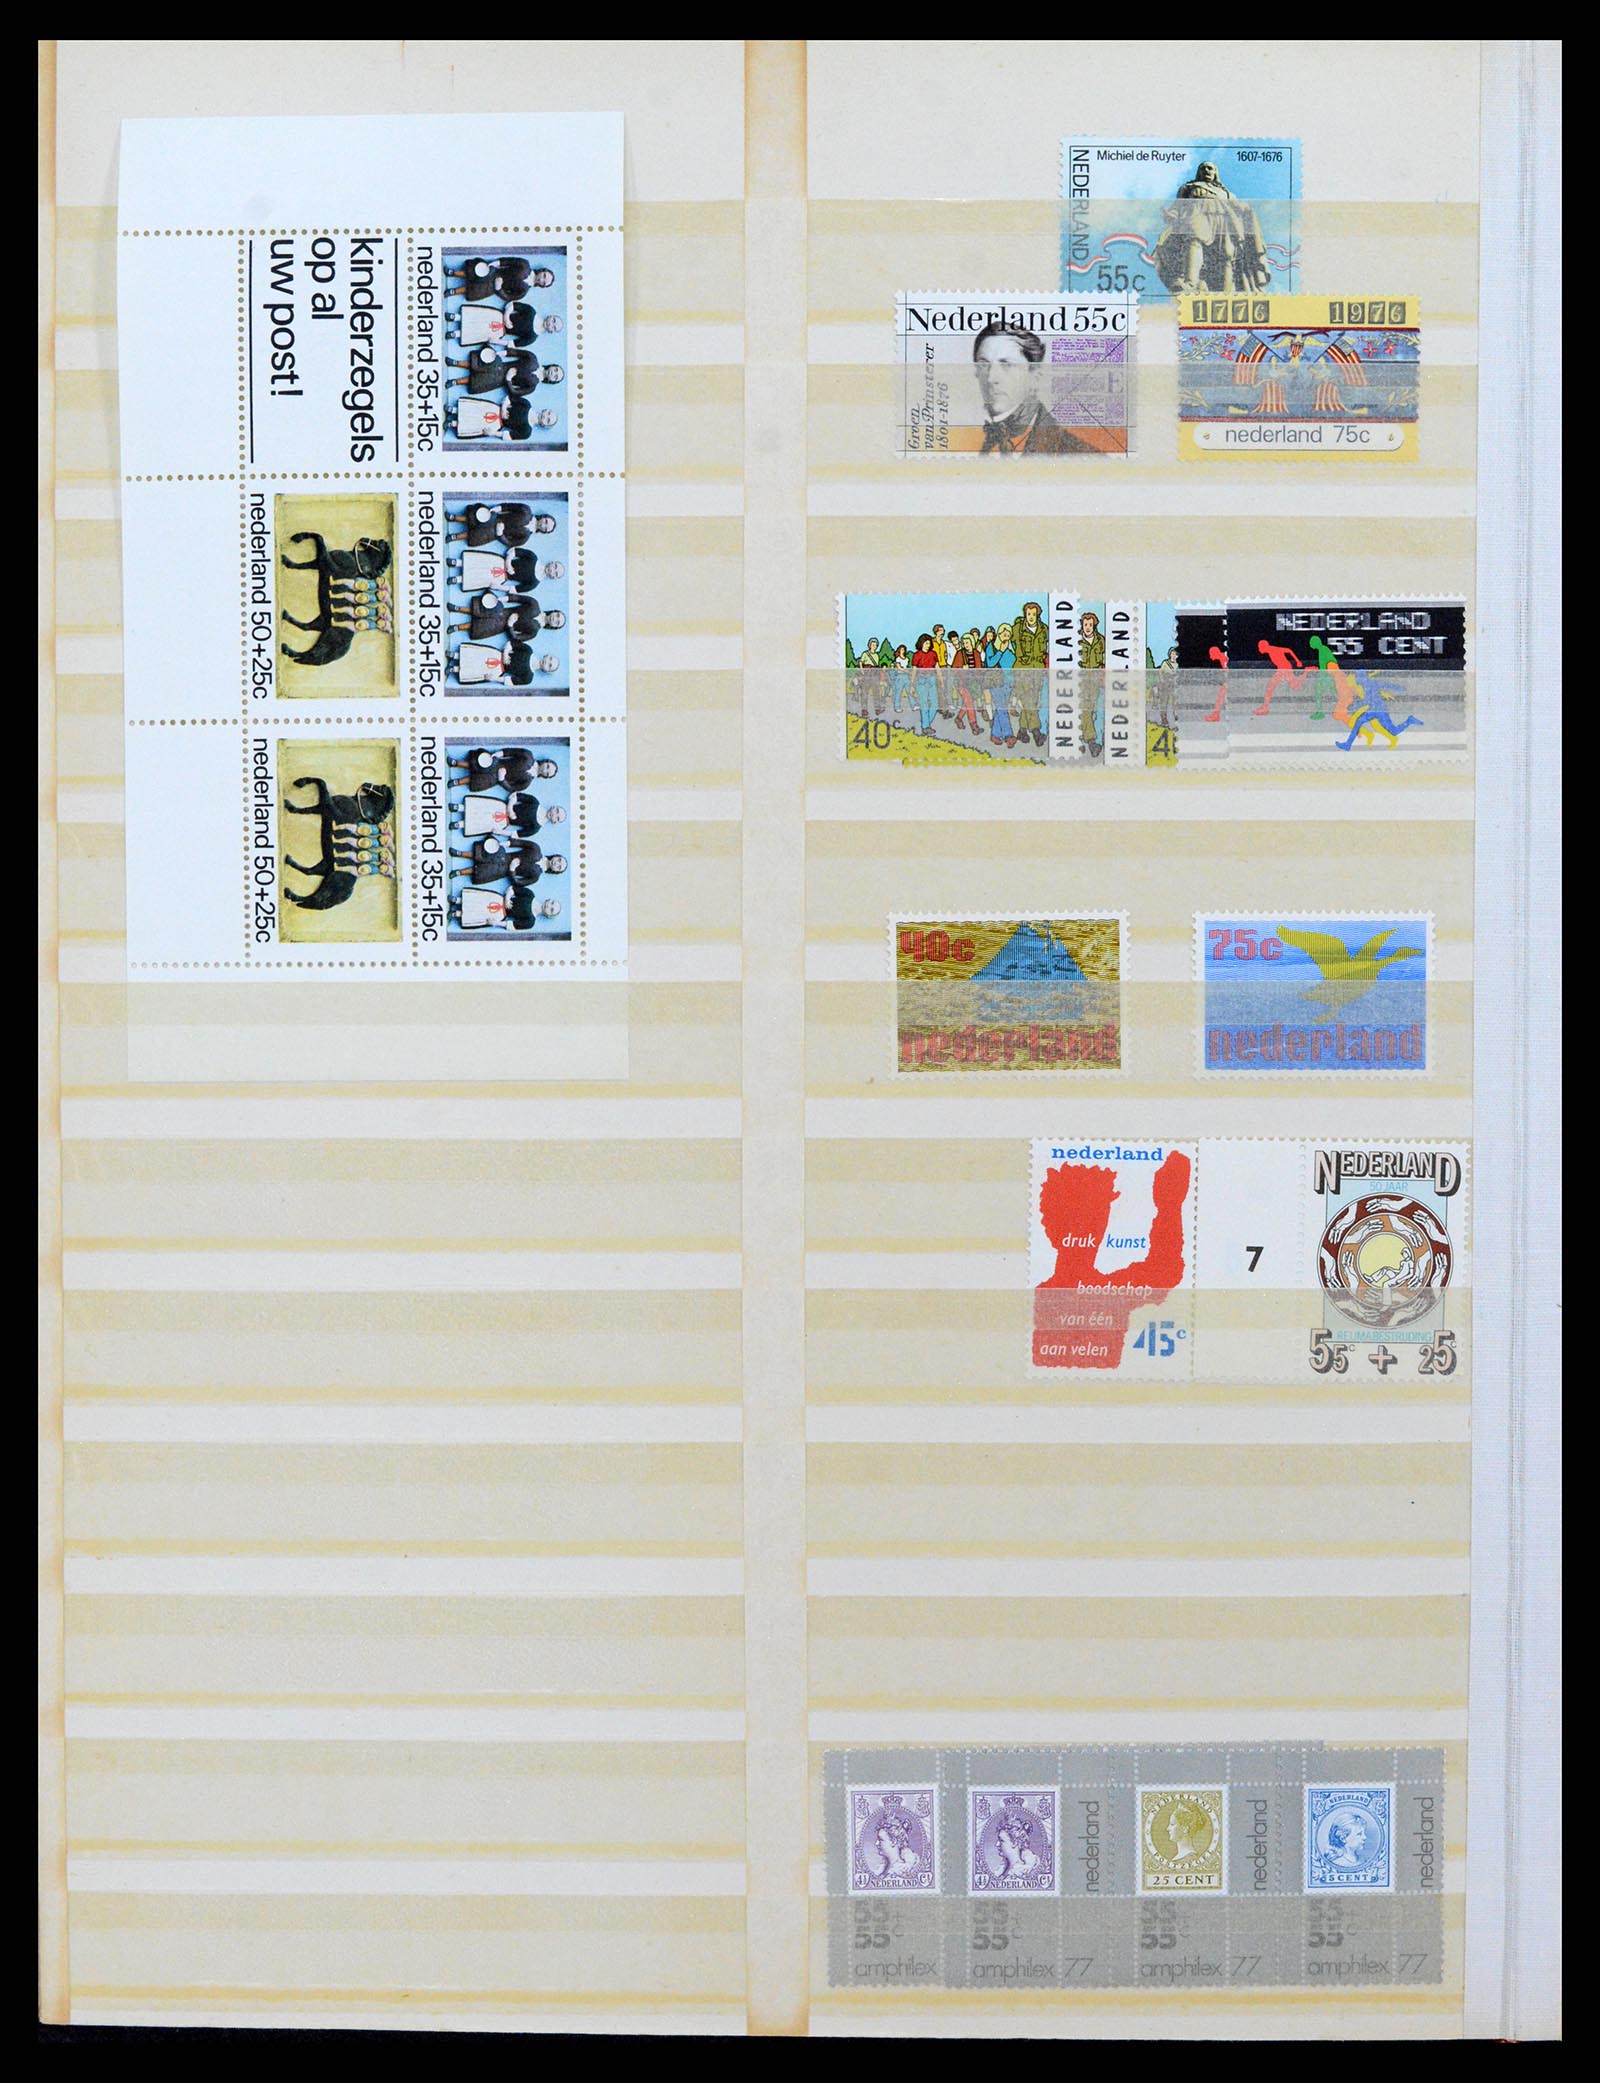 37714 020 - Stamp collection 37714 Netherlands 1920-1979.